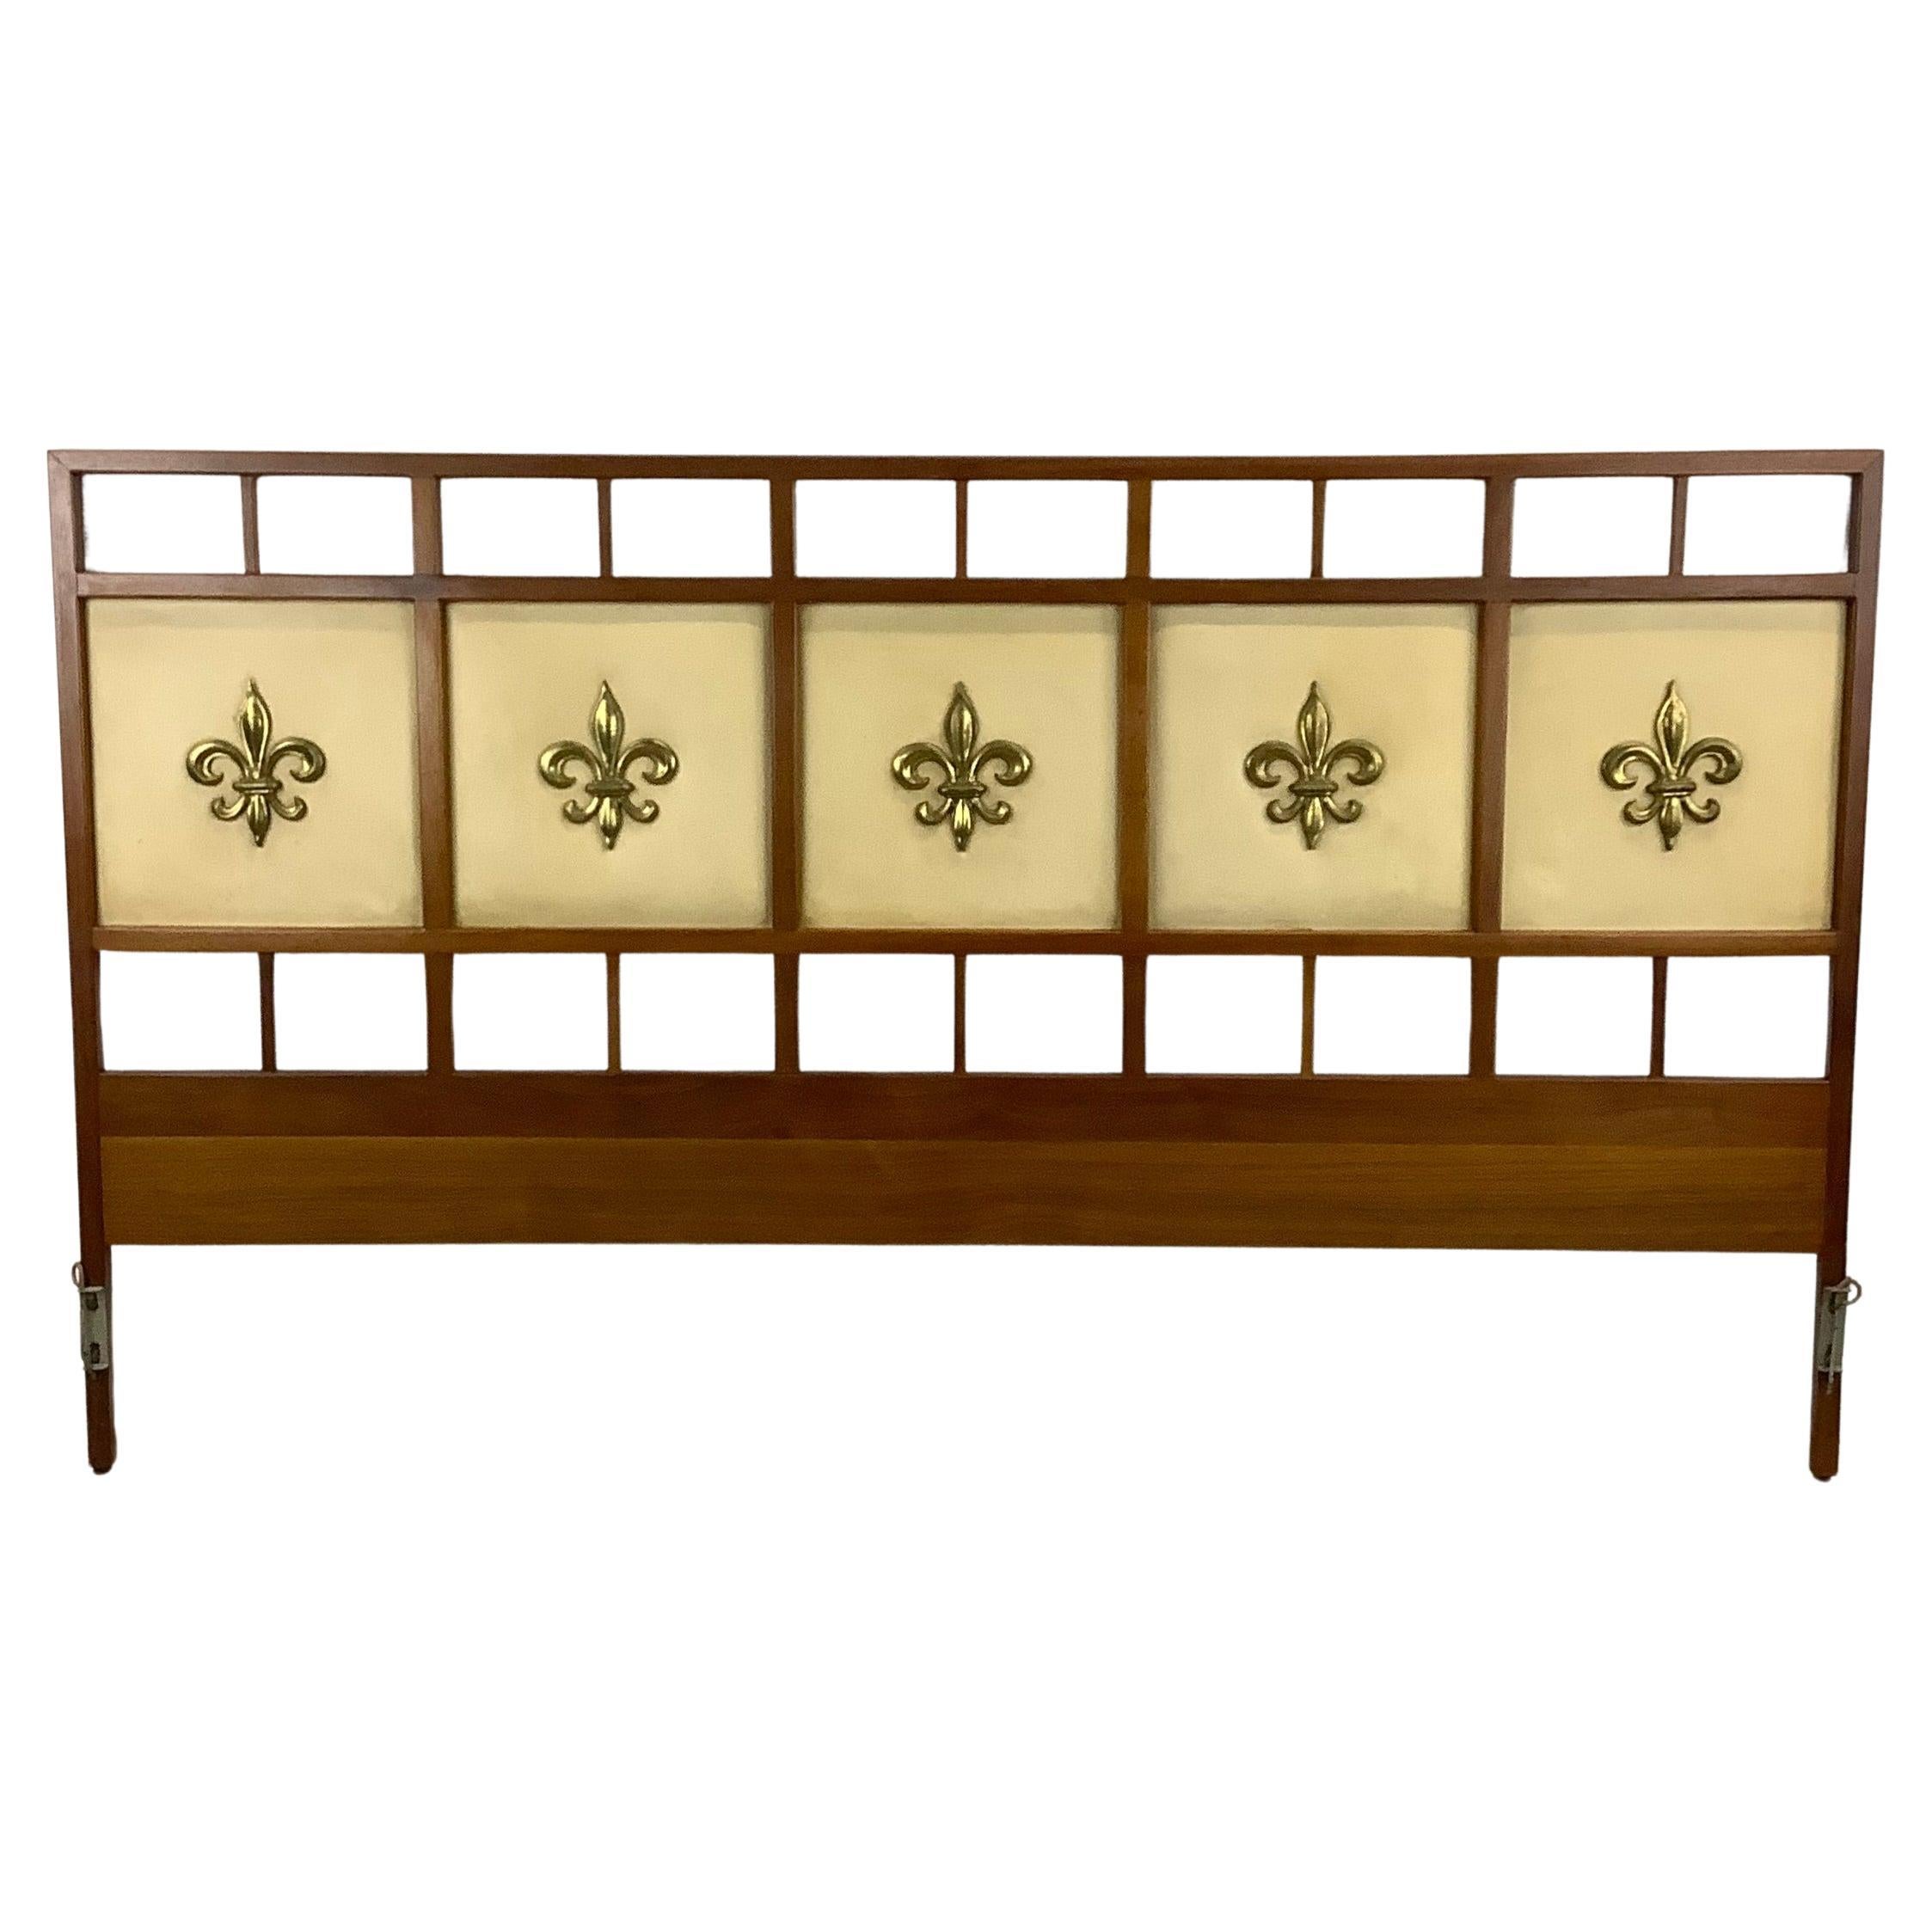 Midcentury Headboard by Gerry Zanck for Gregori, King For Sale